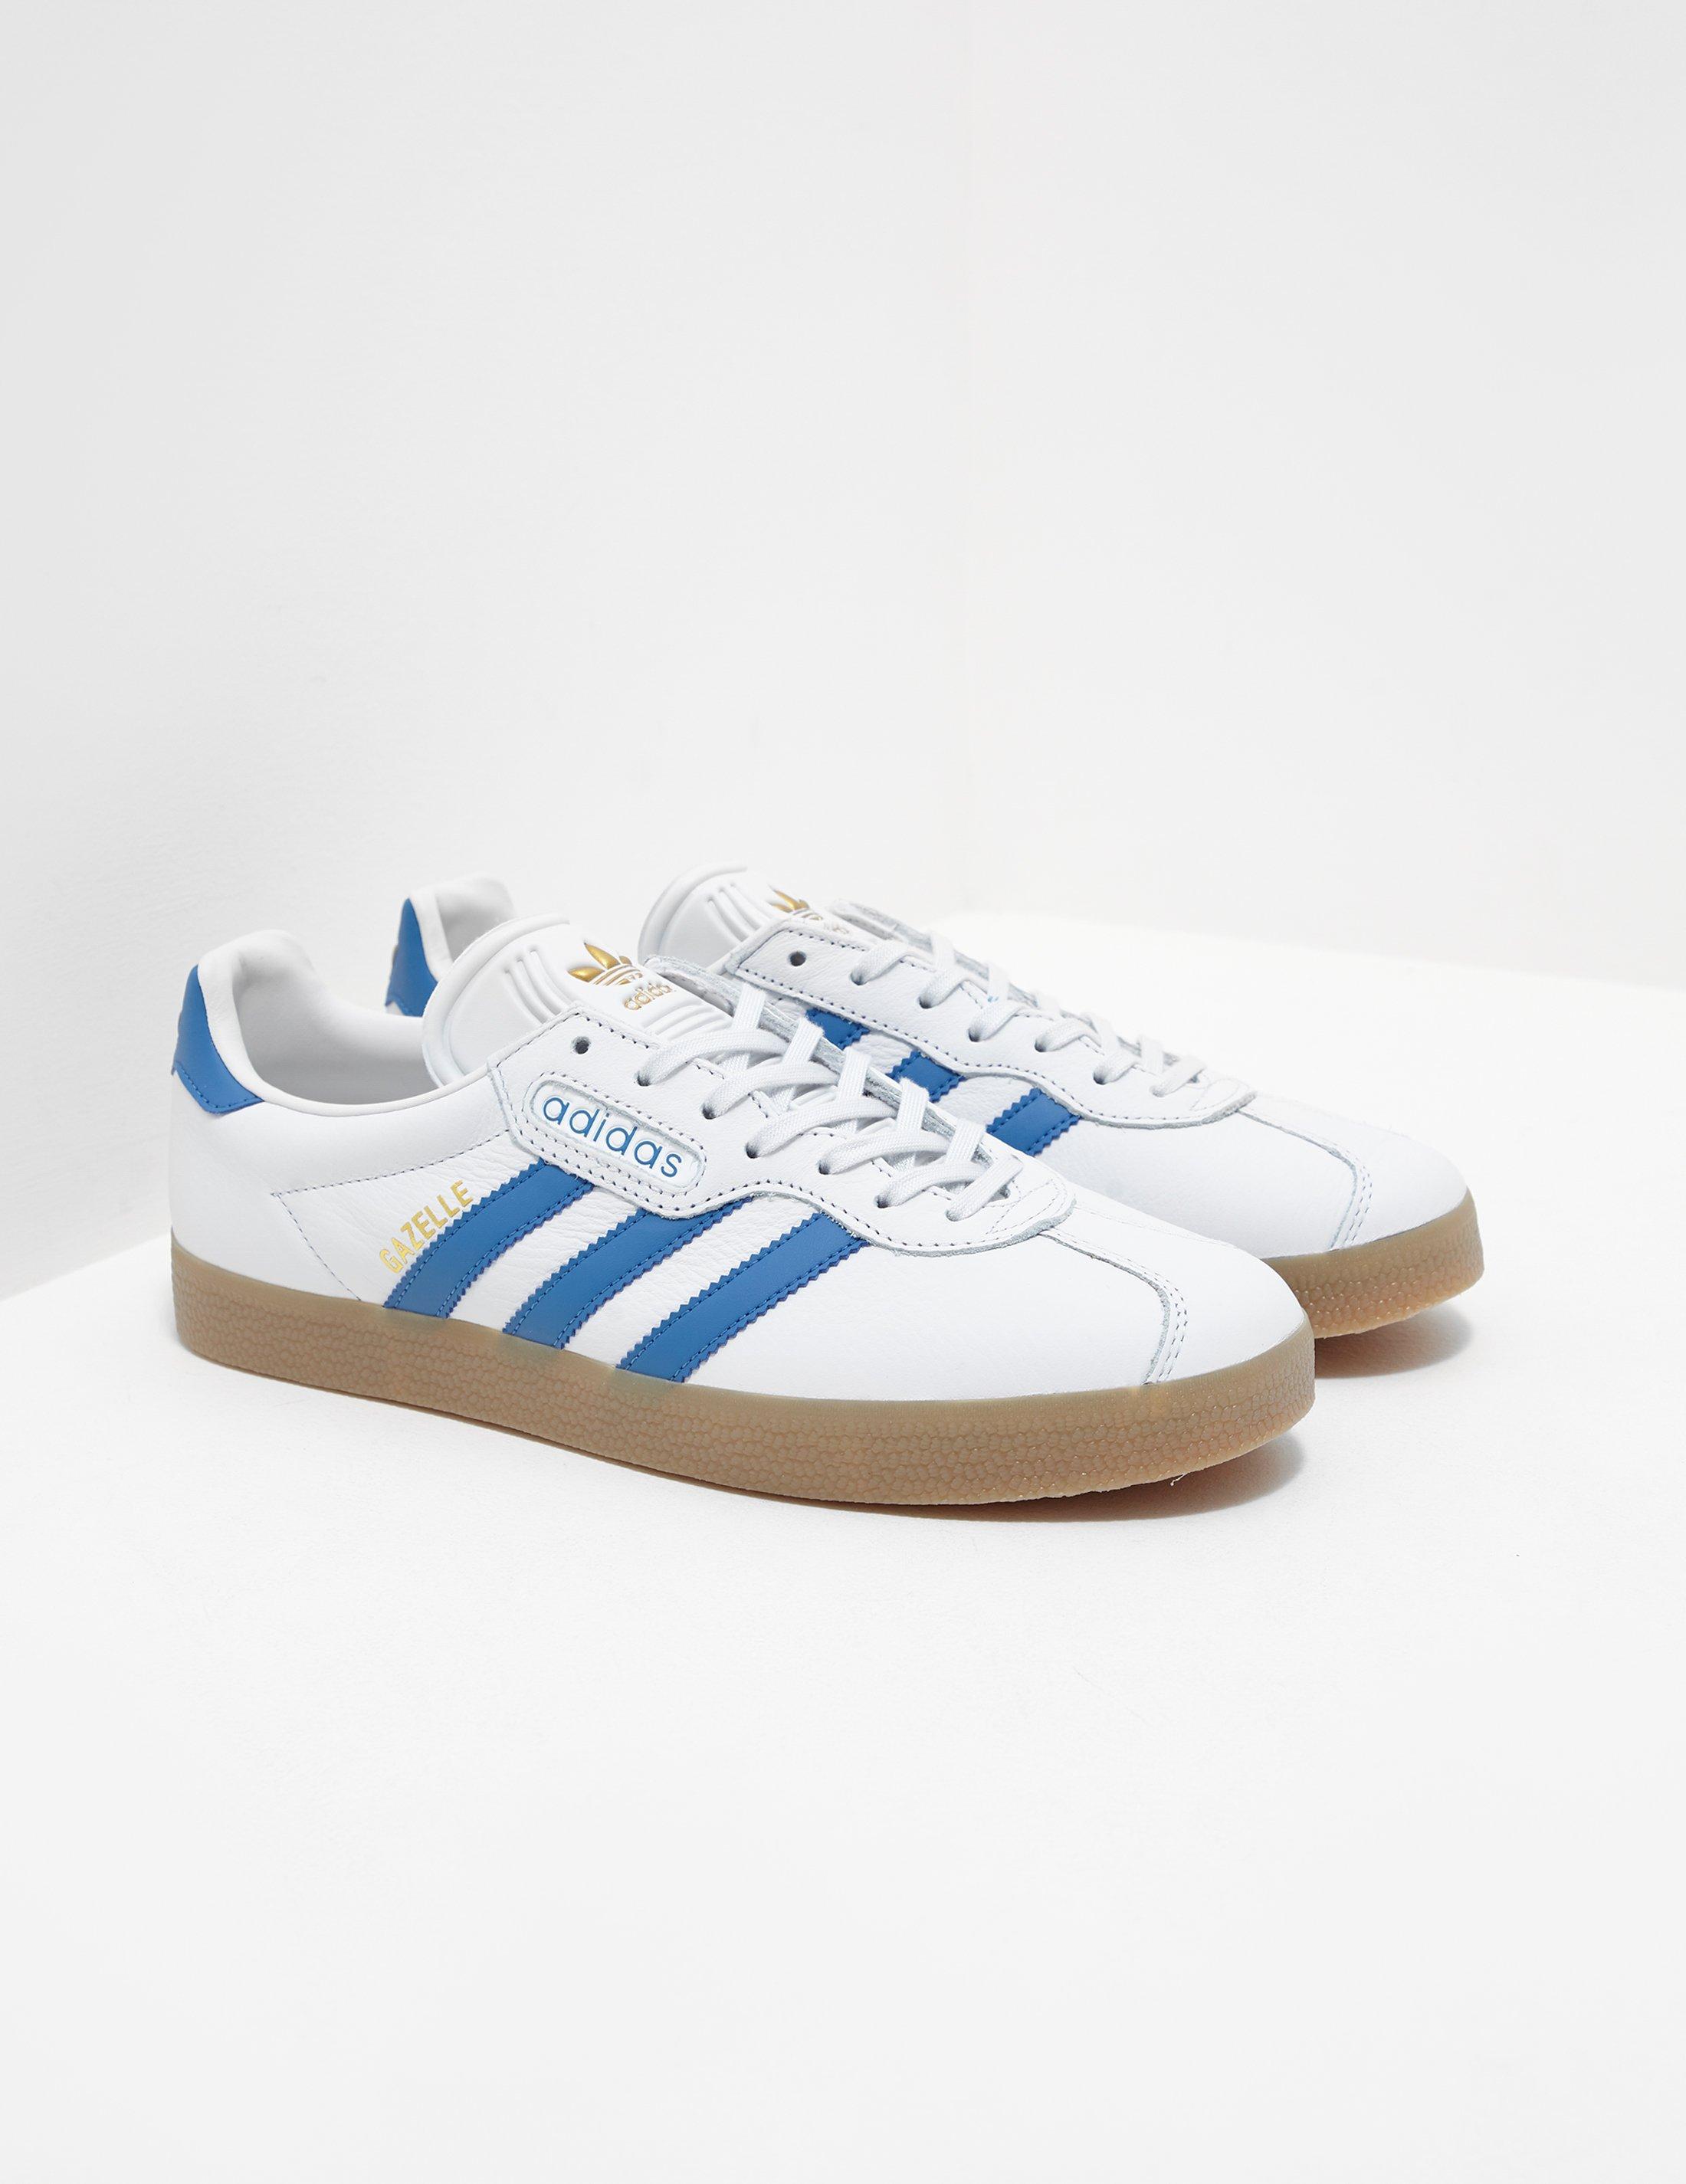 adidas originals gazelle super sneakers in white and blue, grand bargain  Hit A 81% Discount - statehouse.gov.sl